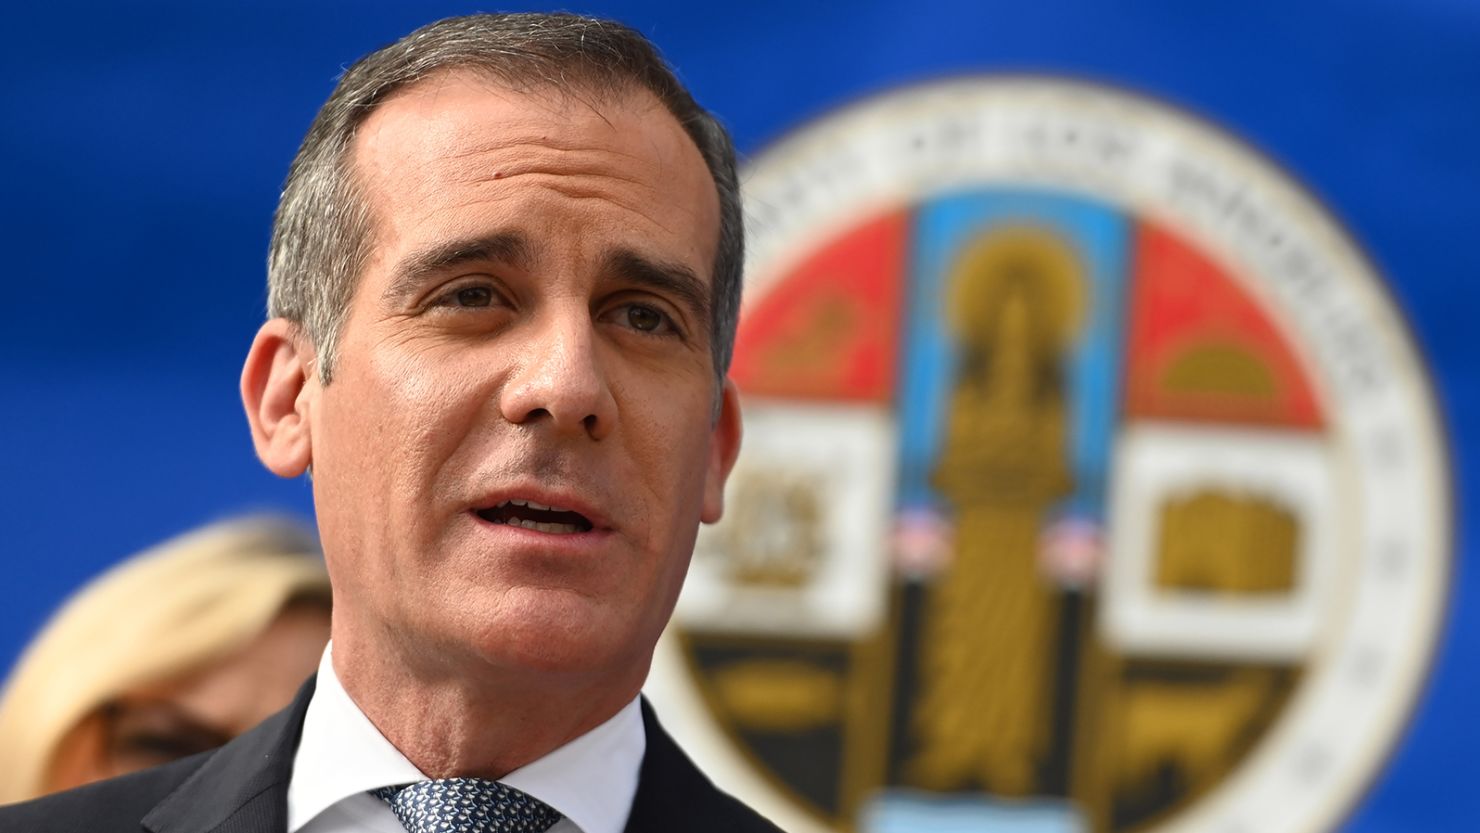 Then-Los Angeles Mayor Eric Garcetti speaks at a press conference on March 4, 2020 in Los Angeles, California.